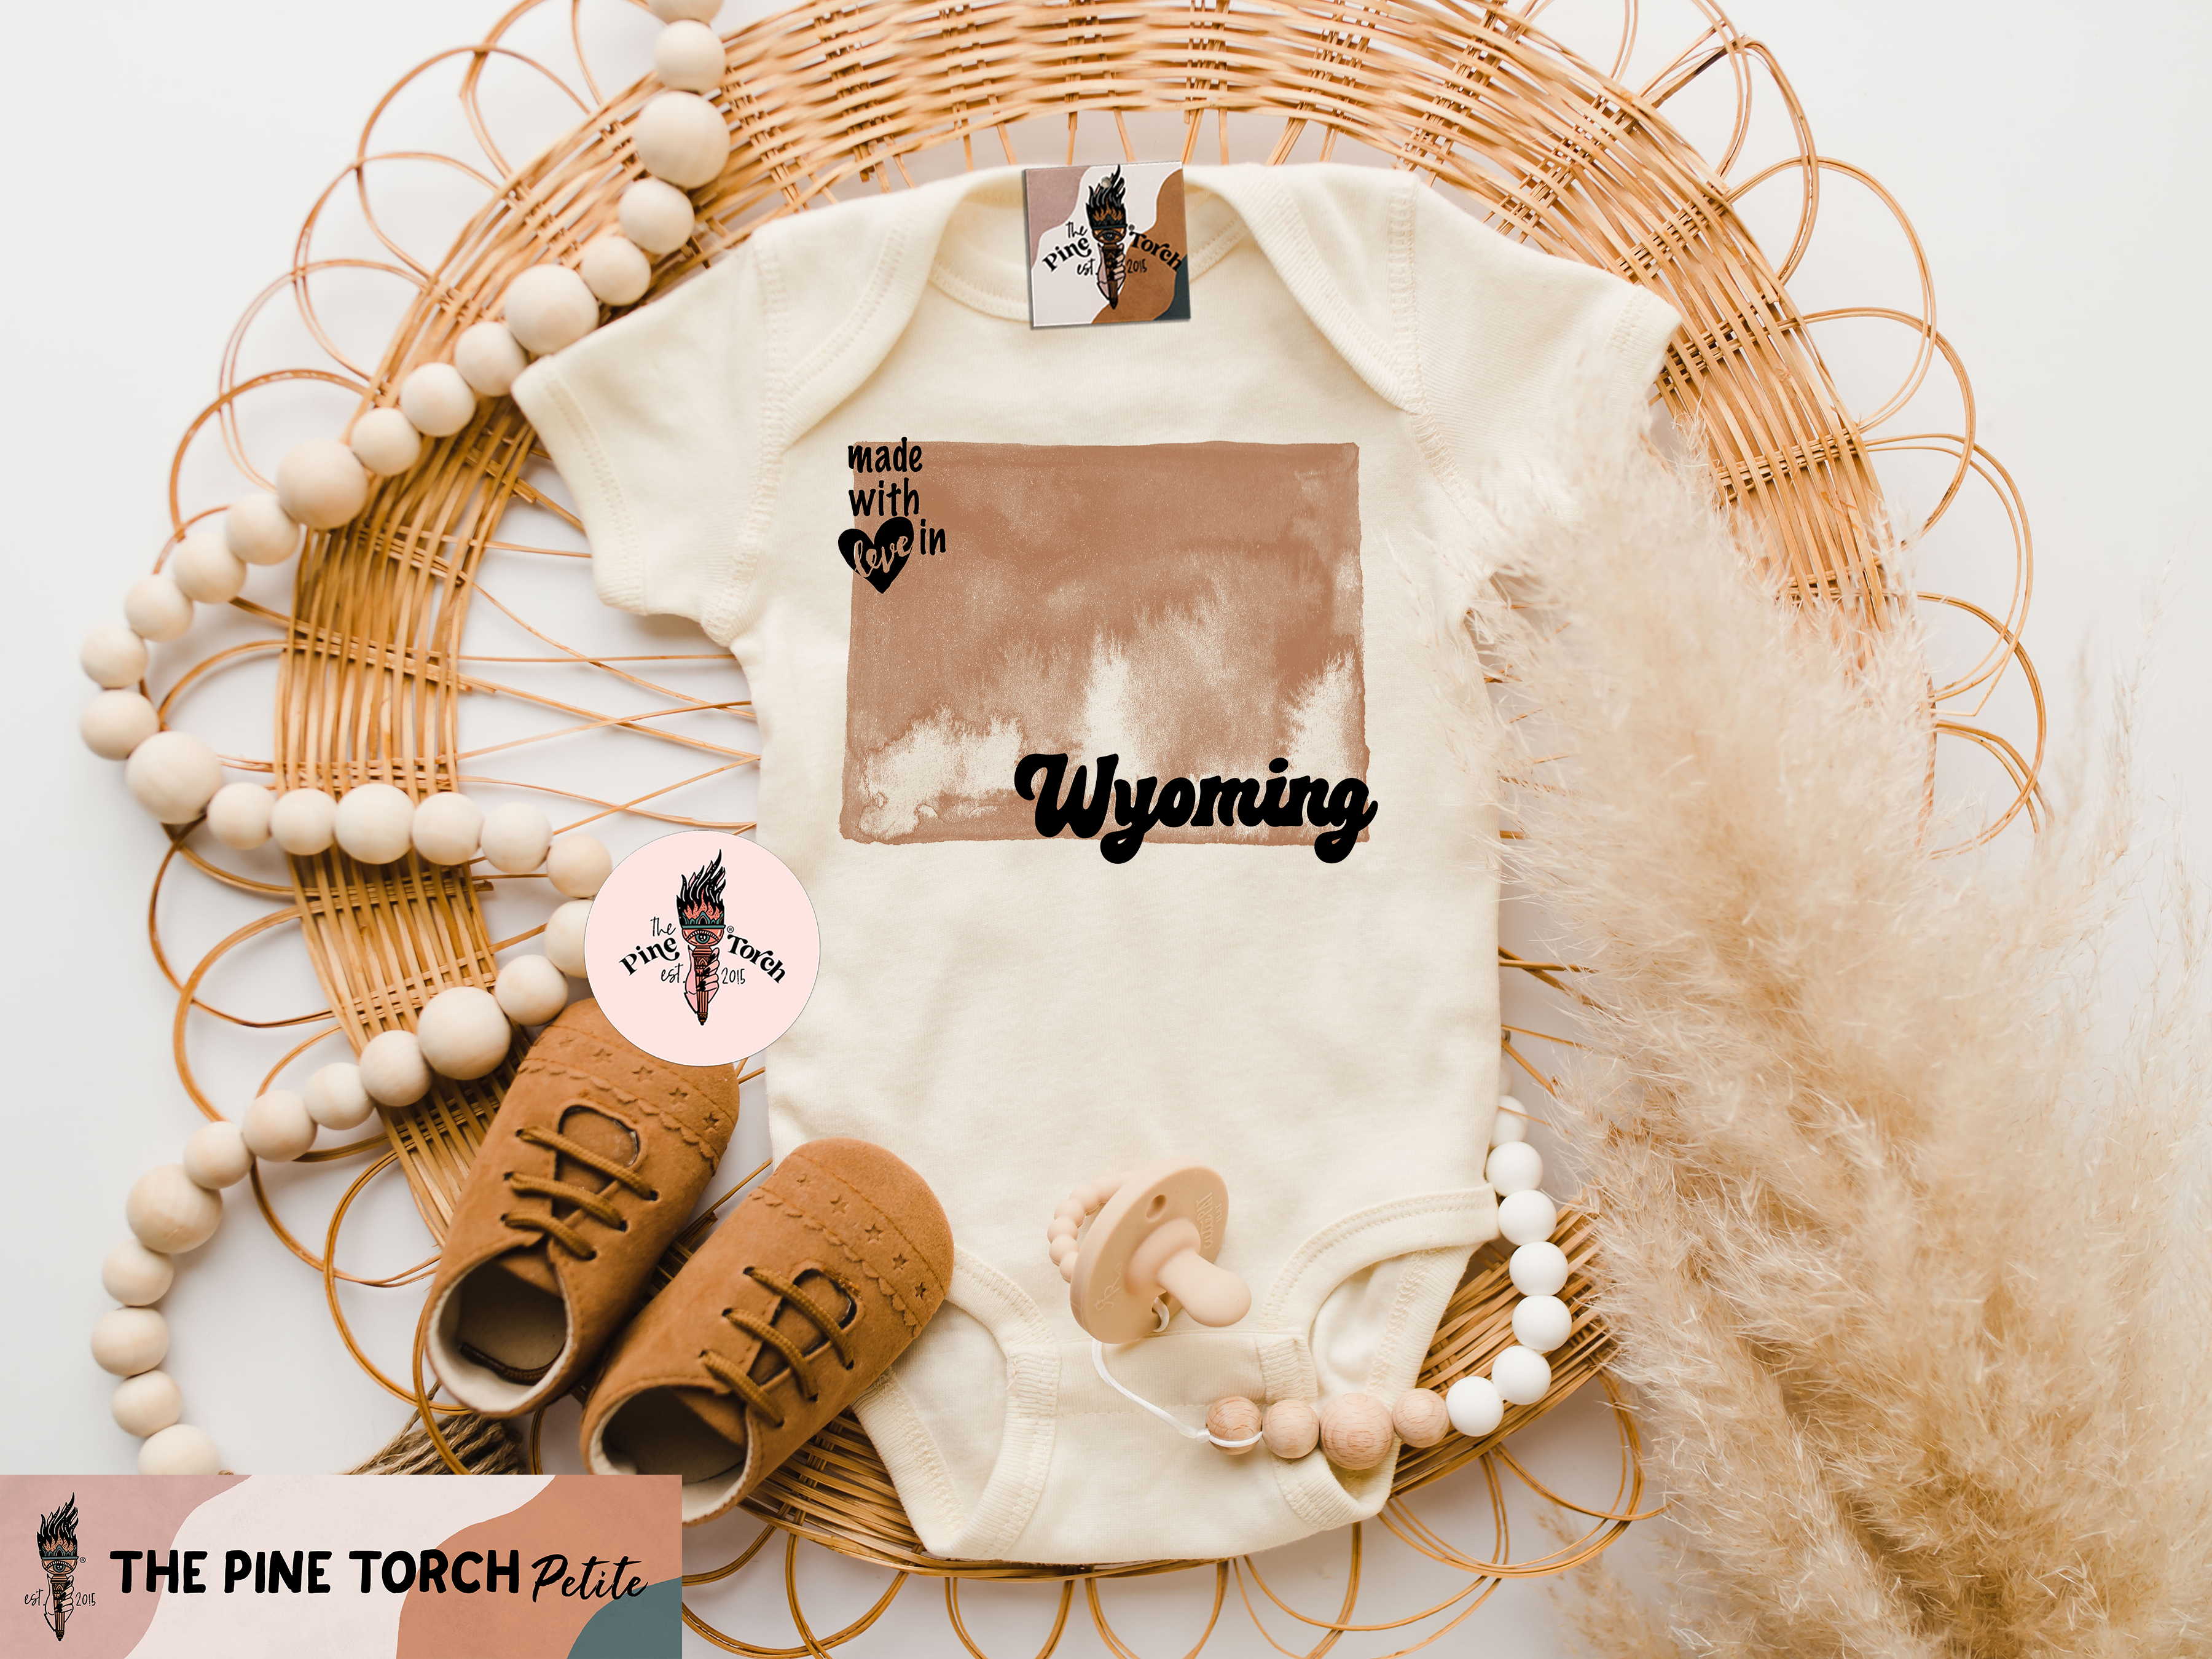 « MADE WITH LOVE IN WYOMING » BODYSUIT